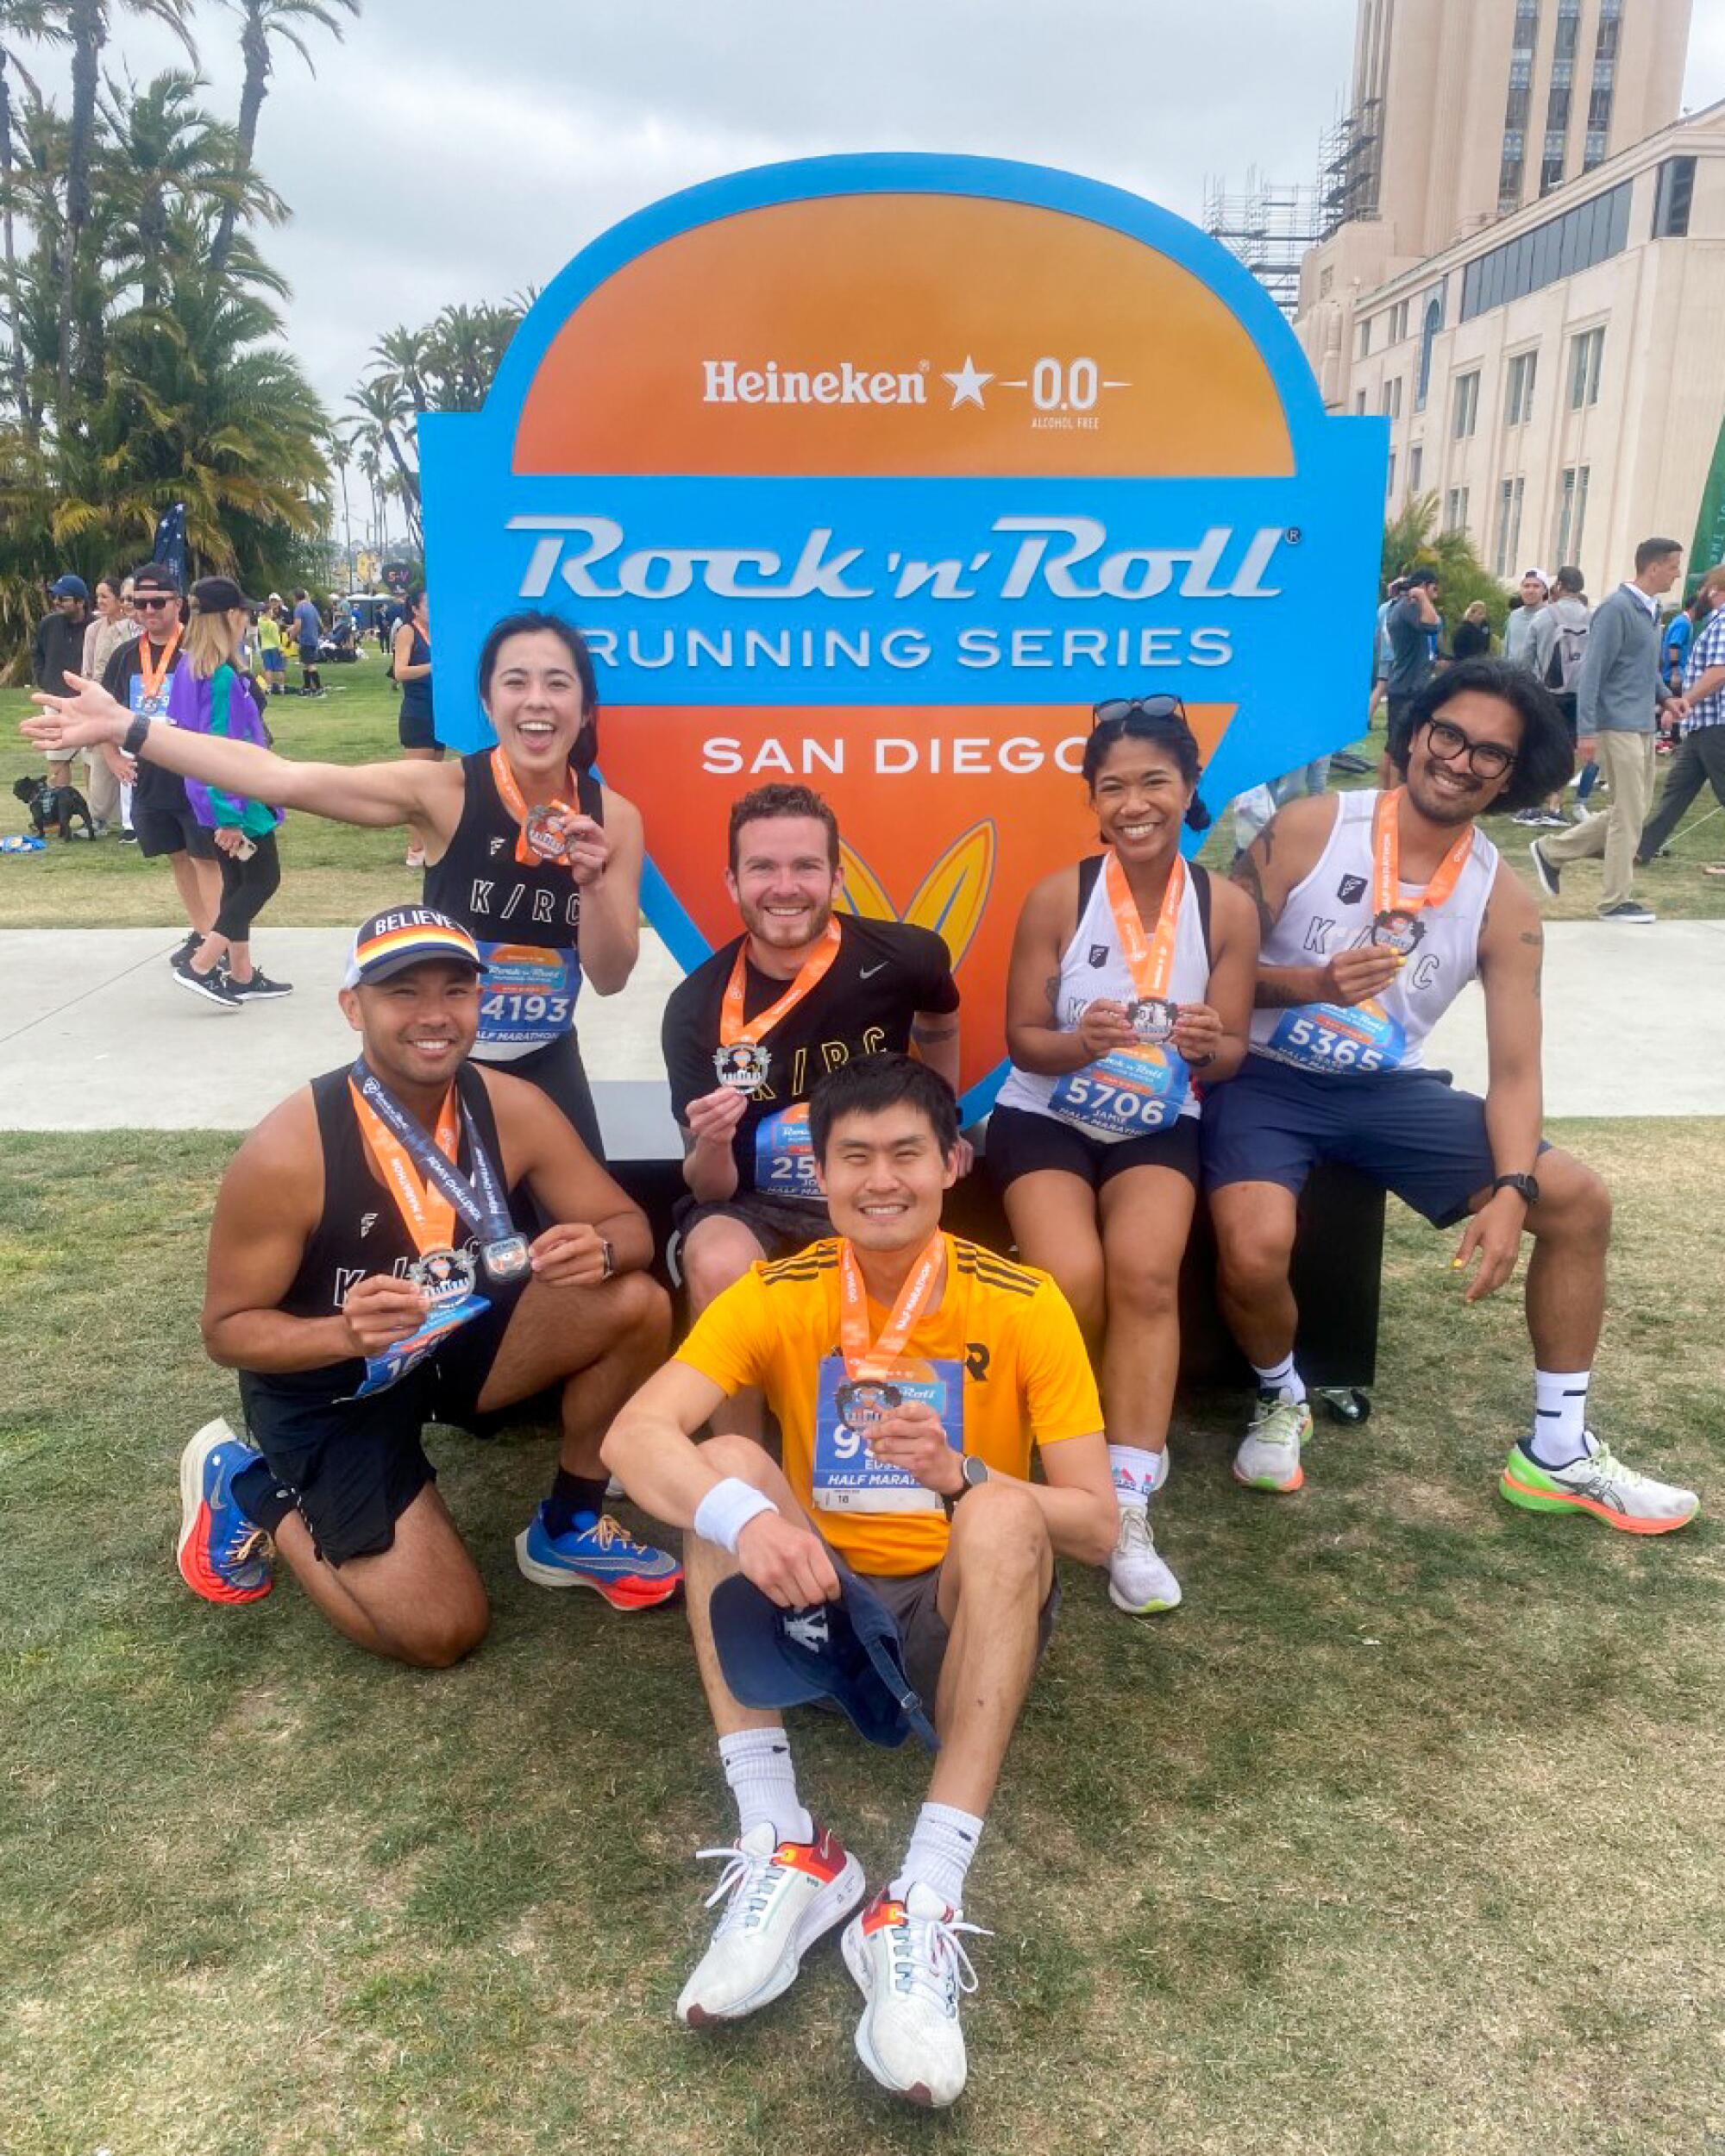 A group of people from a run club pose in front of a Rock and Roll Running Series sign.